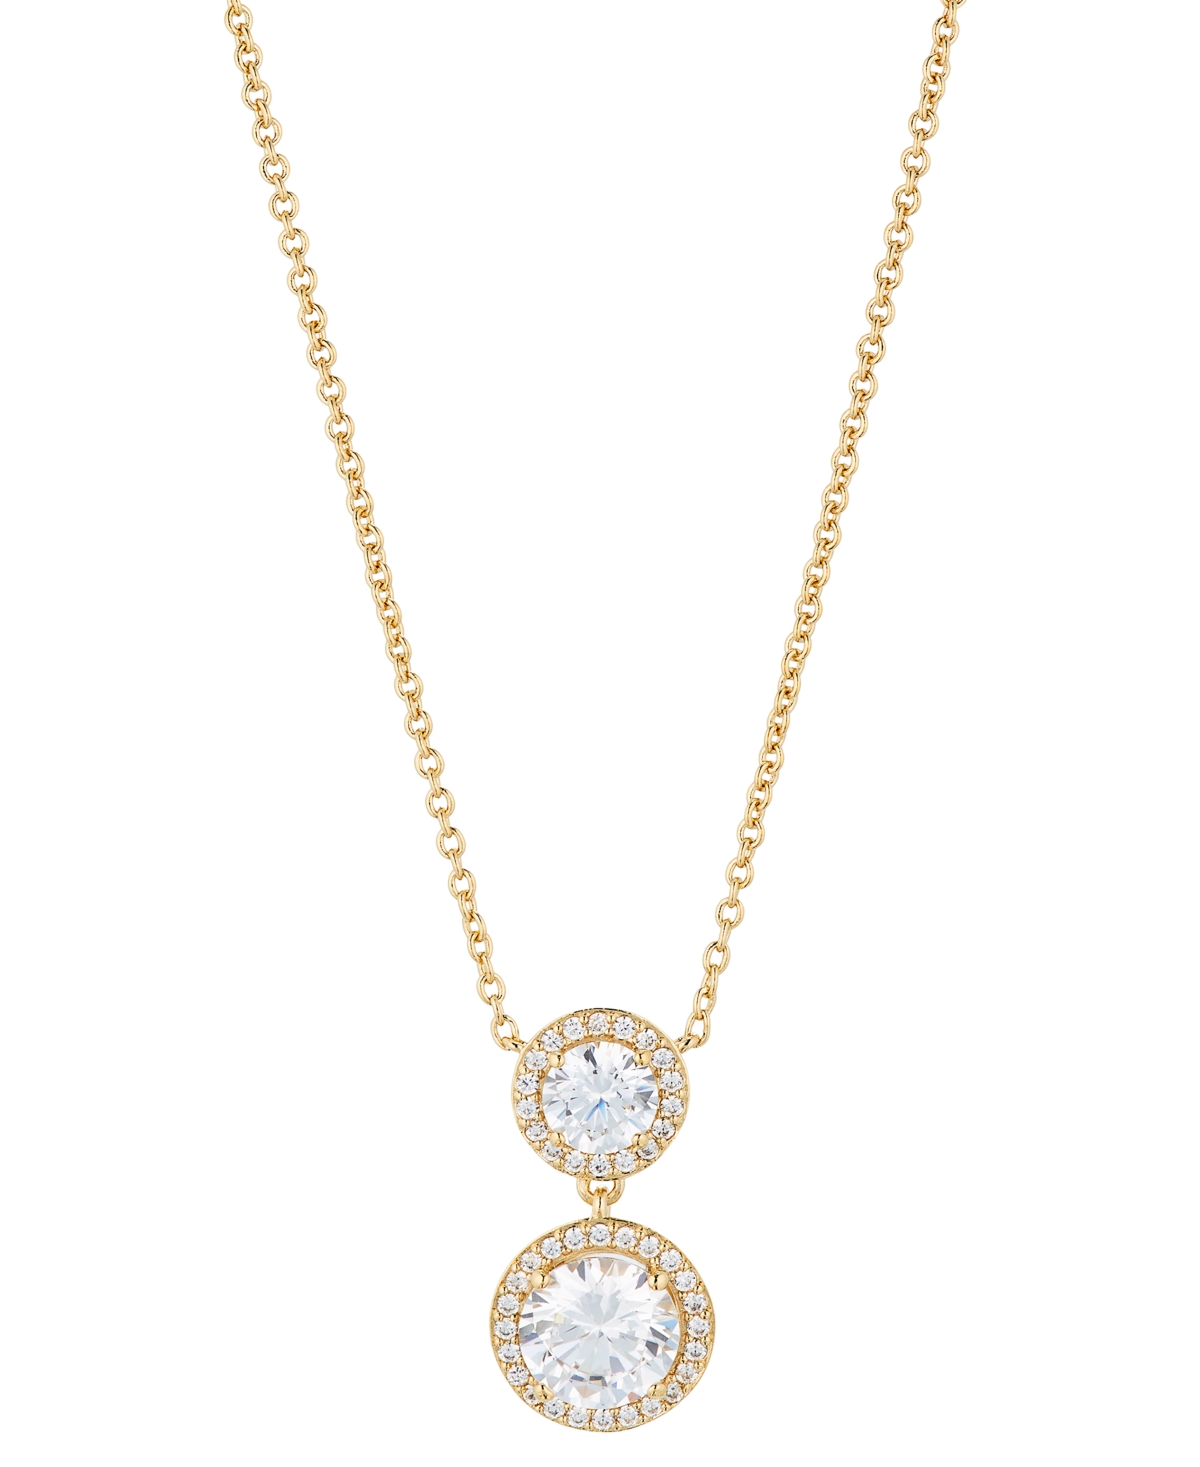 Gold-Tone Cubic Zirconia Round Halo Pendant Necklace, 16" + 2" extender, Created for Macy's - Gold